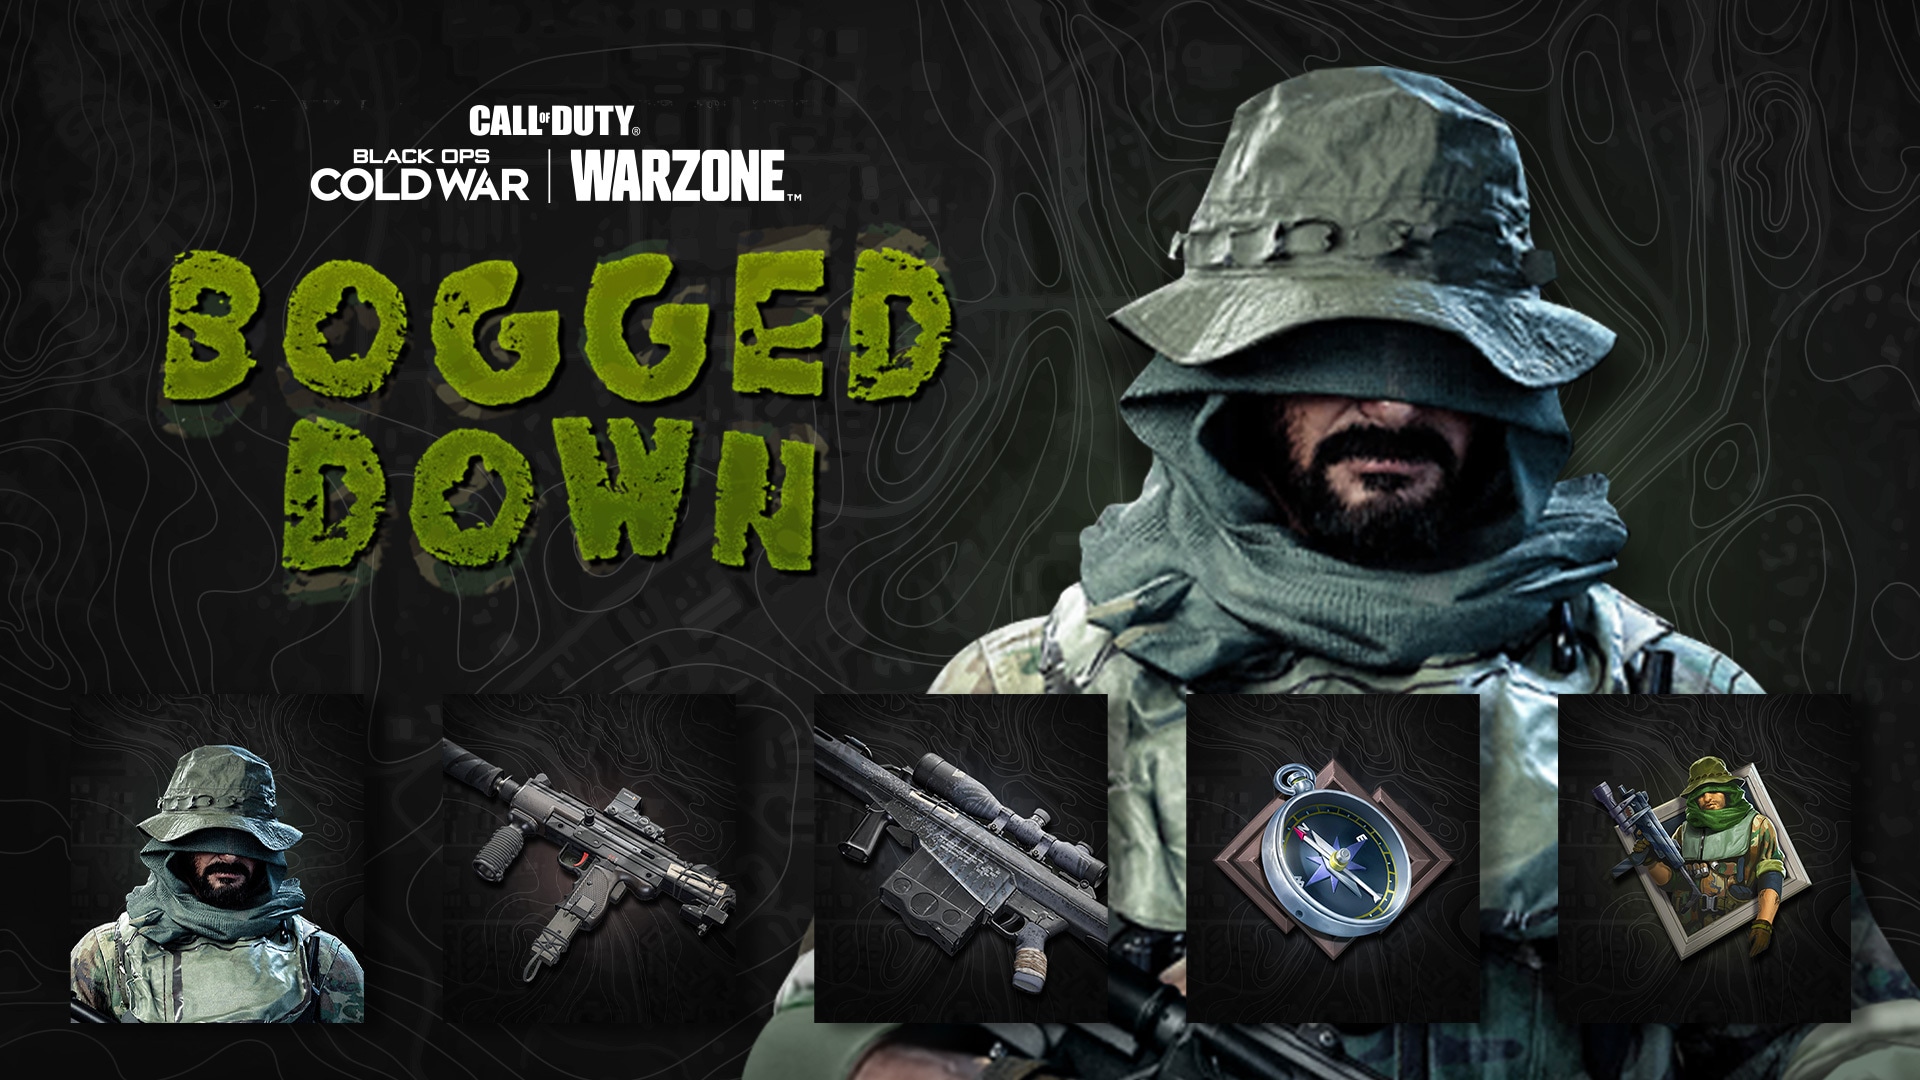 Introducing Call of Duty®: Black Ops Cold War, Warzone™, and Mobile Prime  Gaming rewards for Prime members — news.community.zeus — Blizzard News